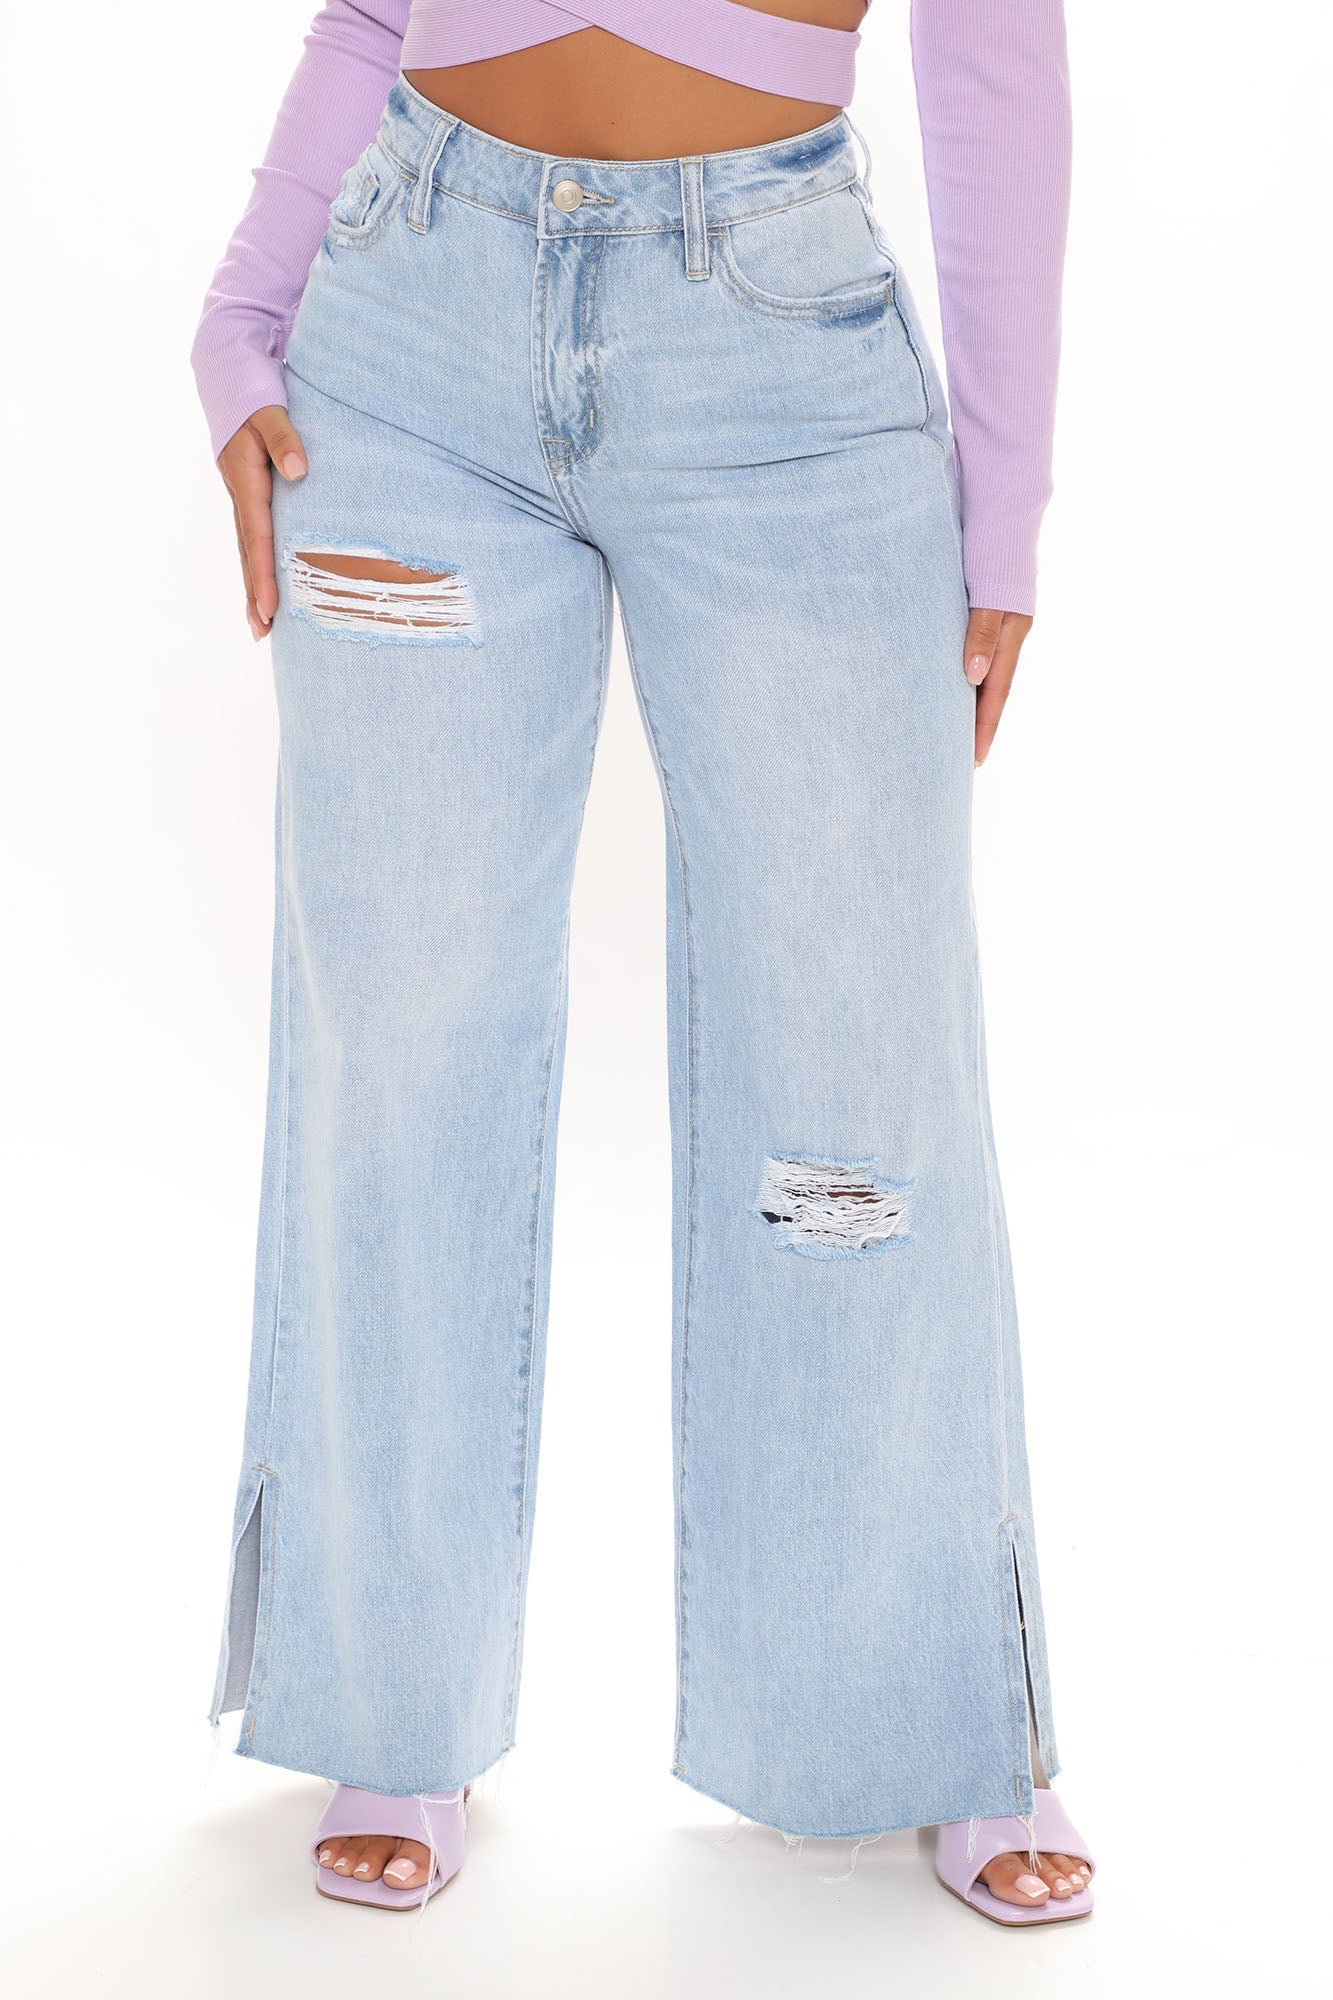 Back In The Day Ripped 90's Side Slit Jeans - Light Blue Wash – InsStreet